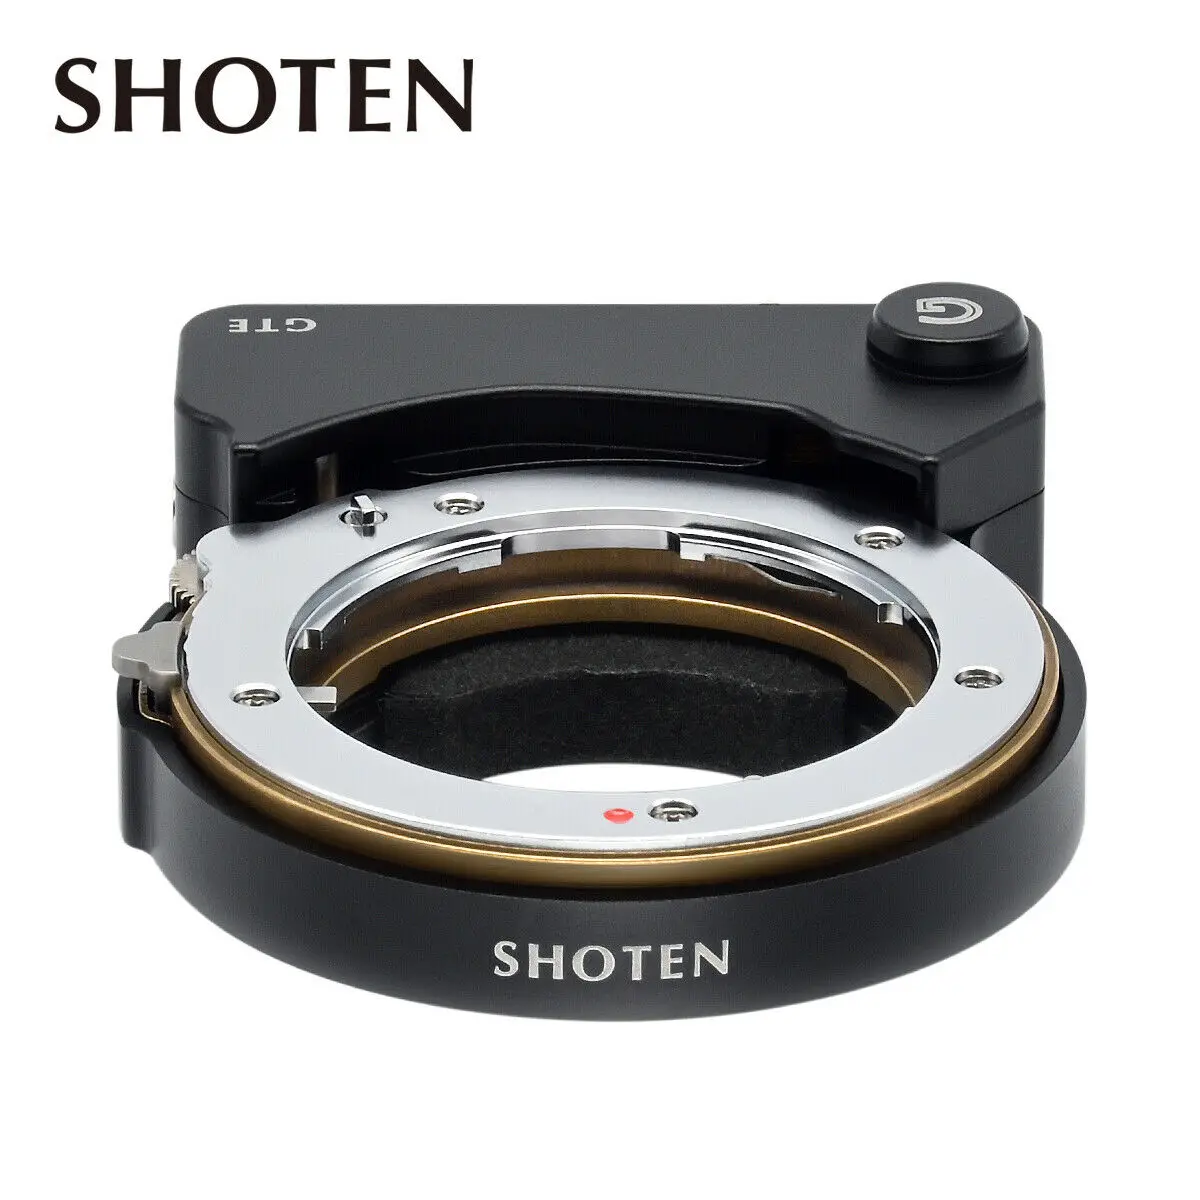 Shoten GTE Auto Focus Lens Adapter for Contax G to Sony a6100 a6600 A73 A7R4 A7C